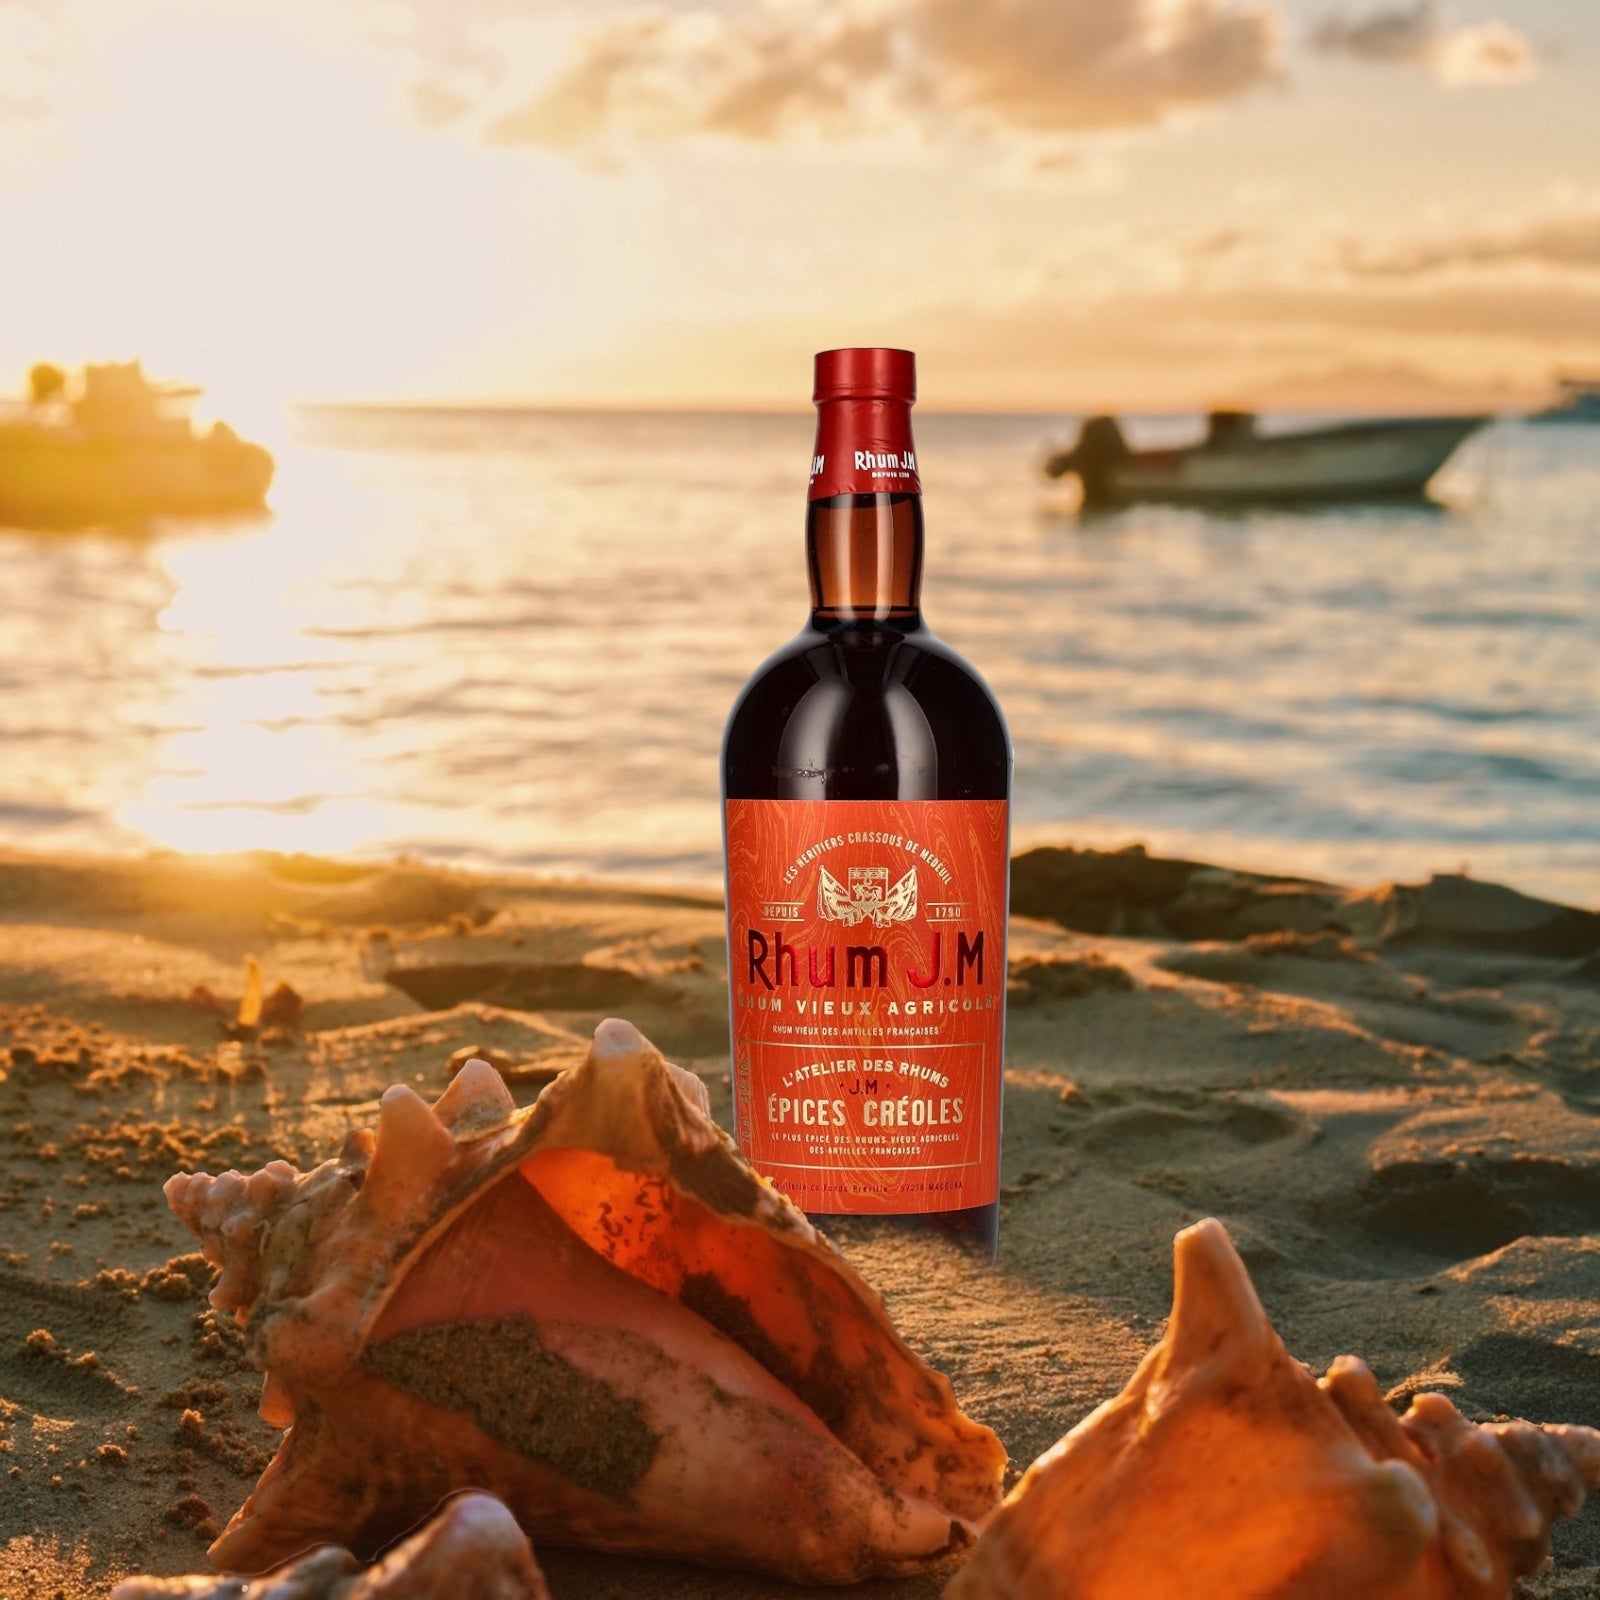 Experience the richness of character with JM Épices Créoles Rum, a spirited delight intensely spiced and full of flavor